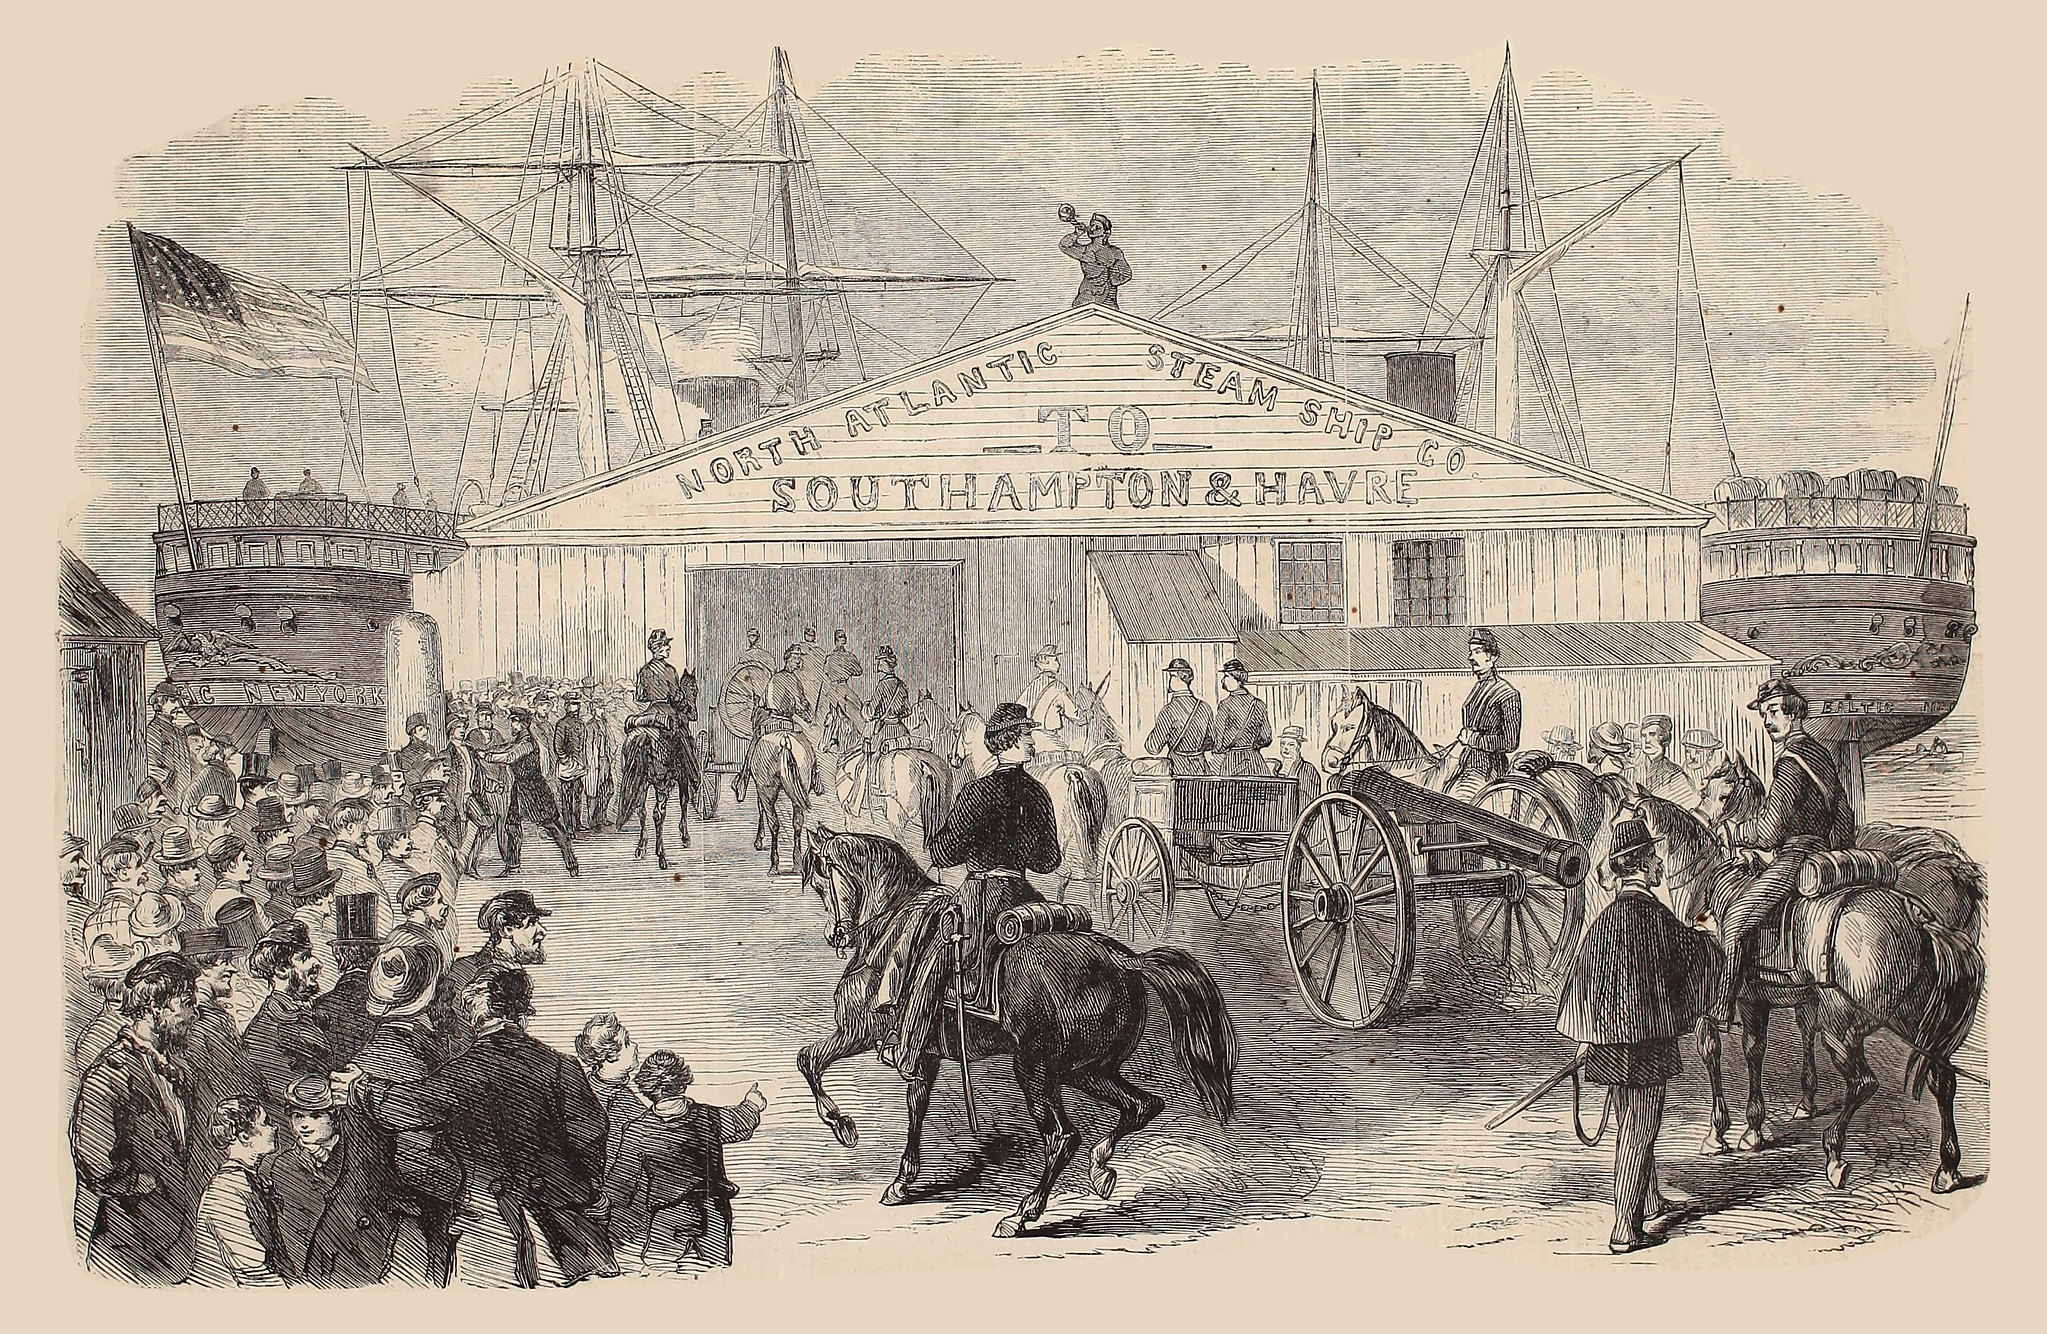 Movement of Troops to the South—Their Arrival—Scene Outside of Collins' Dock, at the Foot of Canal Street, New York, April 6, 1861  Frank Leslie's Illustrated Newspaper, April 20, 1861